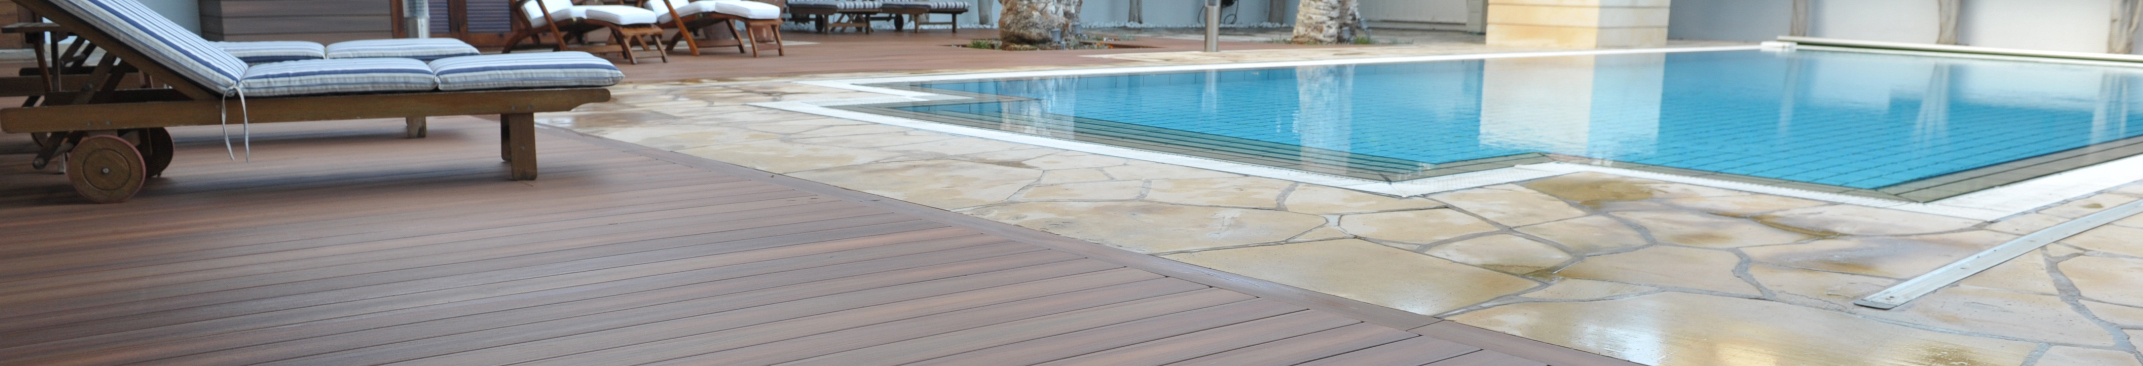 Composite Decking vs Timber – Costs, Durability & Sustainability